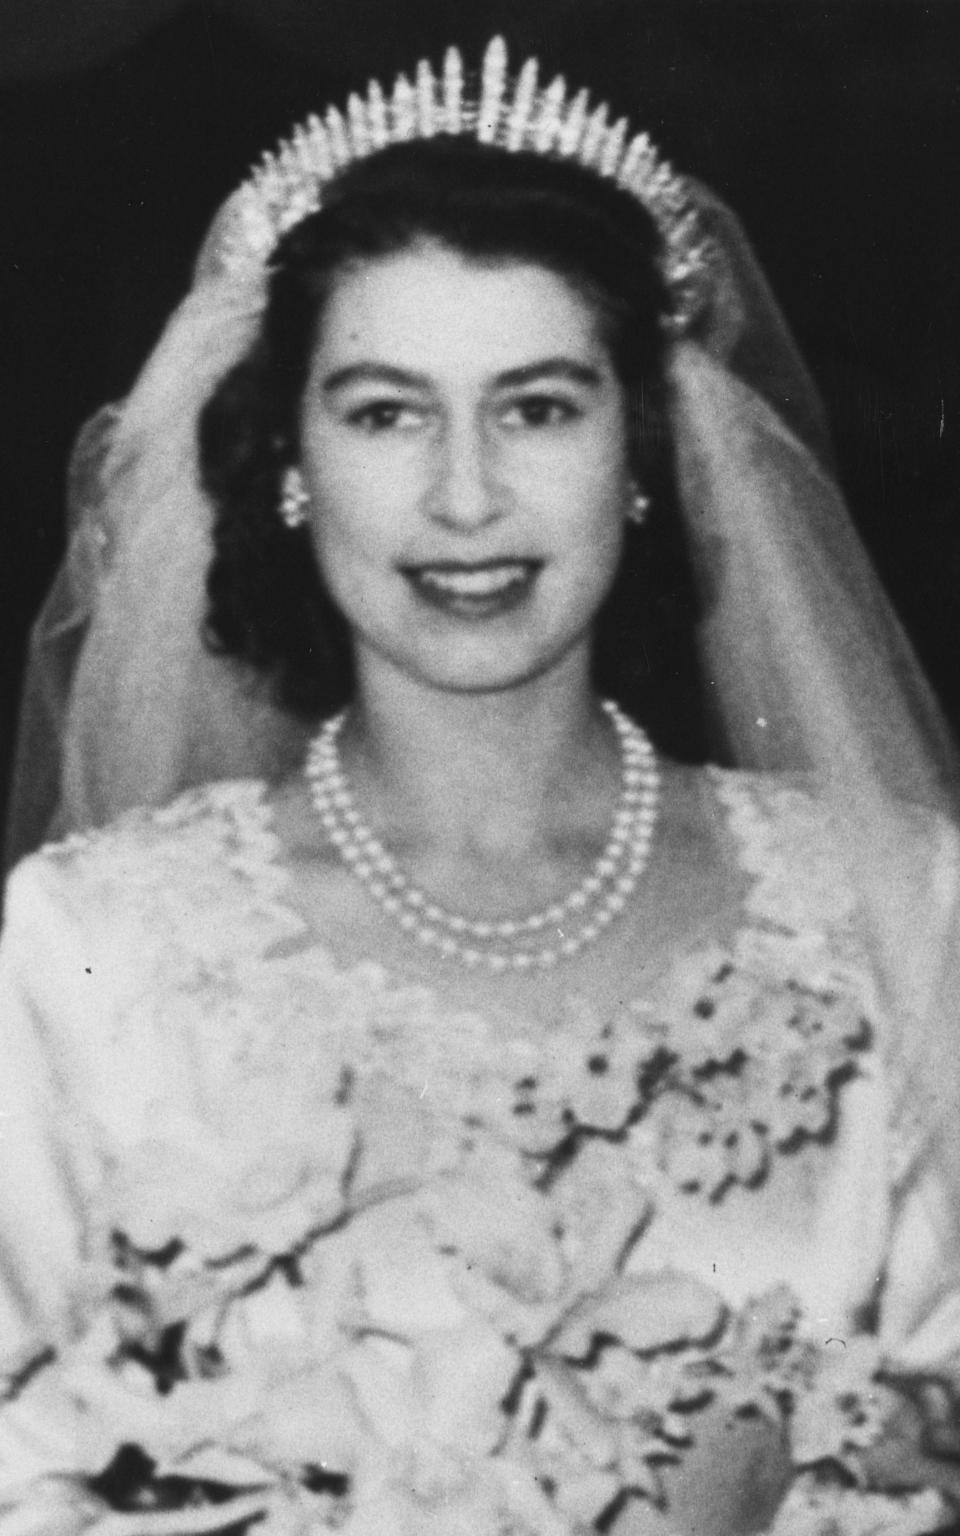 The Queen wearing two strands of pearls on her wedding day in 1947 - Topical Press Agency/Getty Images